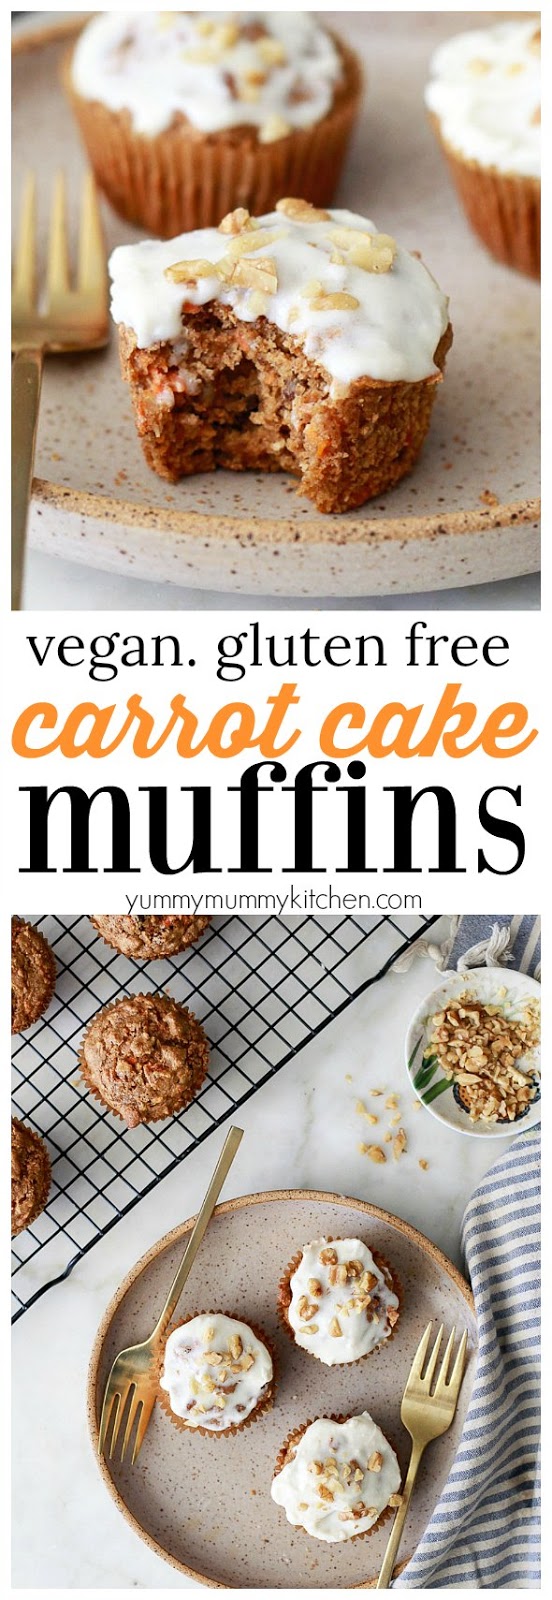 The most delicious gluten free carrot muffins. These easy muffins are made in the blender. They're made with healthy ingredients like oat flour and maple syrup. These carrot muffins are dairy-free, oil-free, gluten-free, and vegan! 